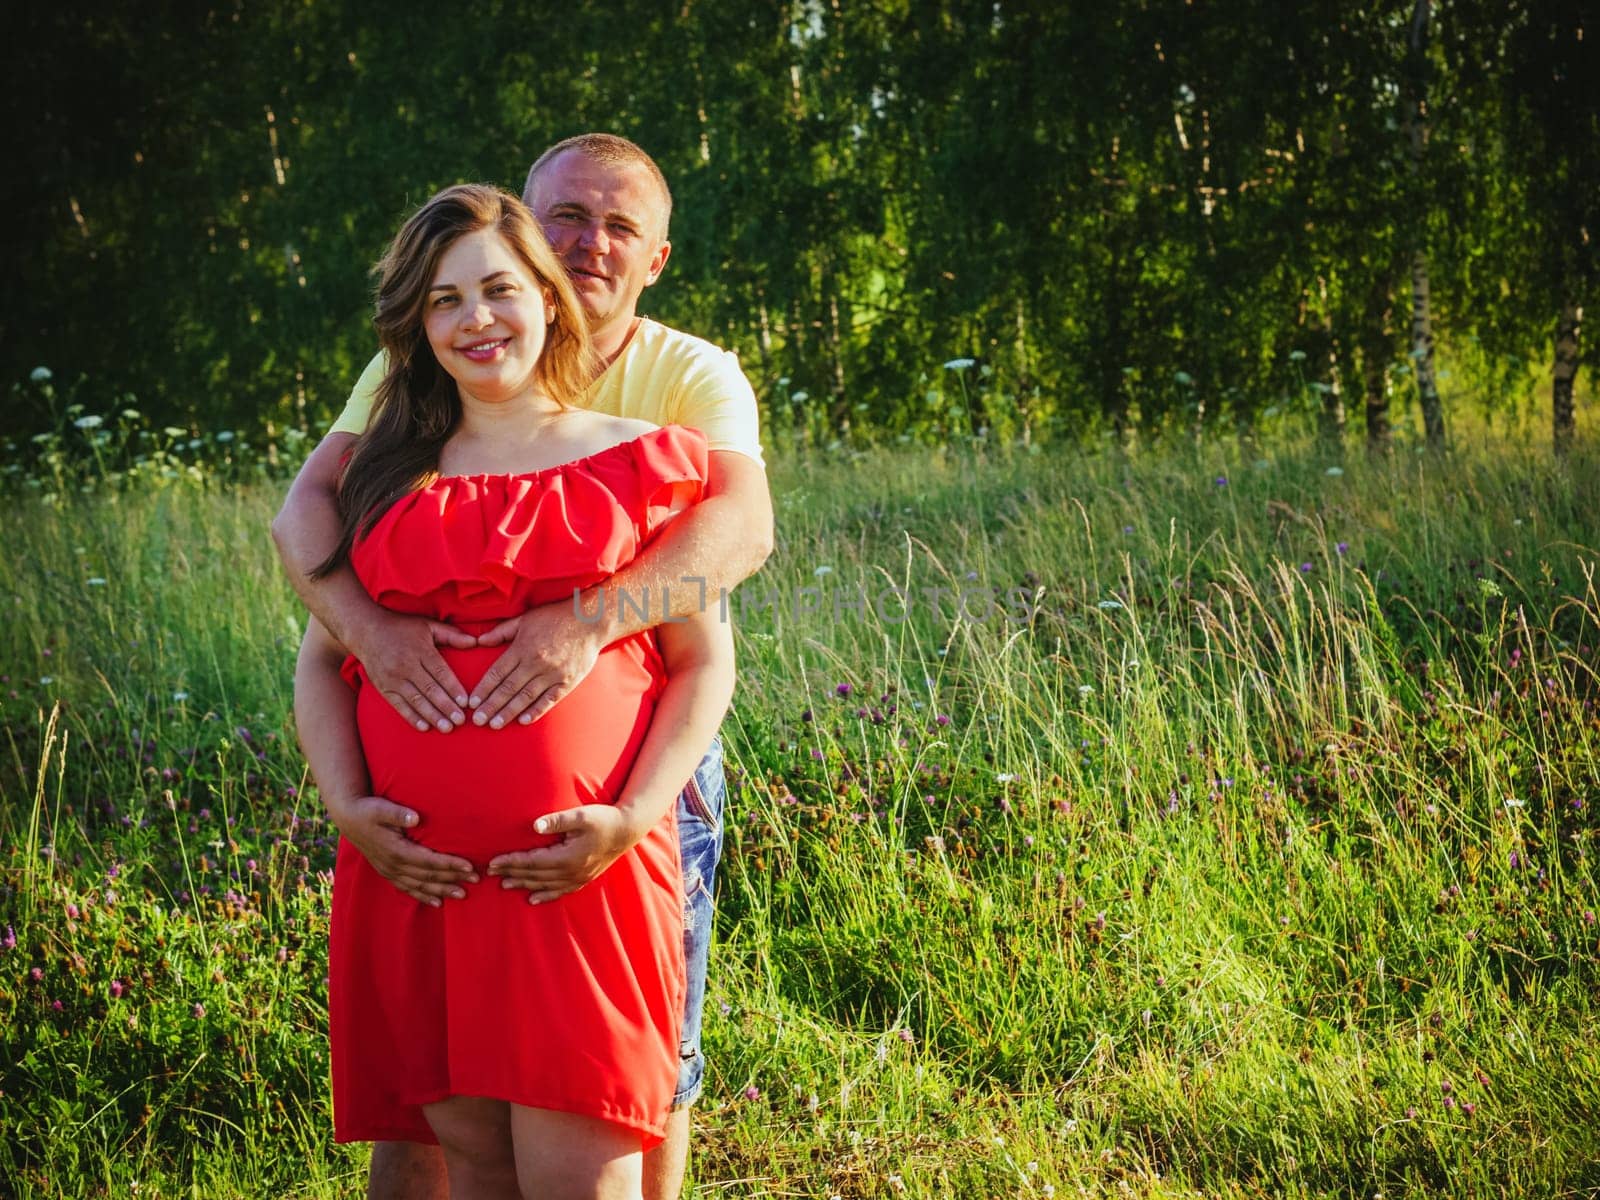 Smiling beautiful pregnant woman in red dress and her husband with hands on belly outdoors. Man embraces from behind belly pregnant wife and smiling